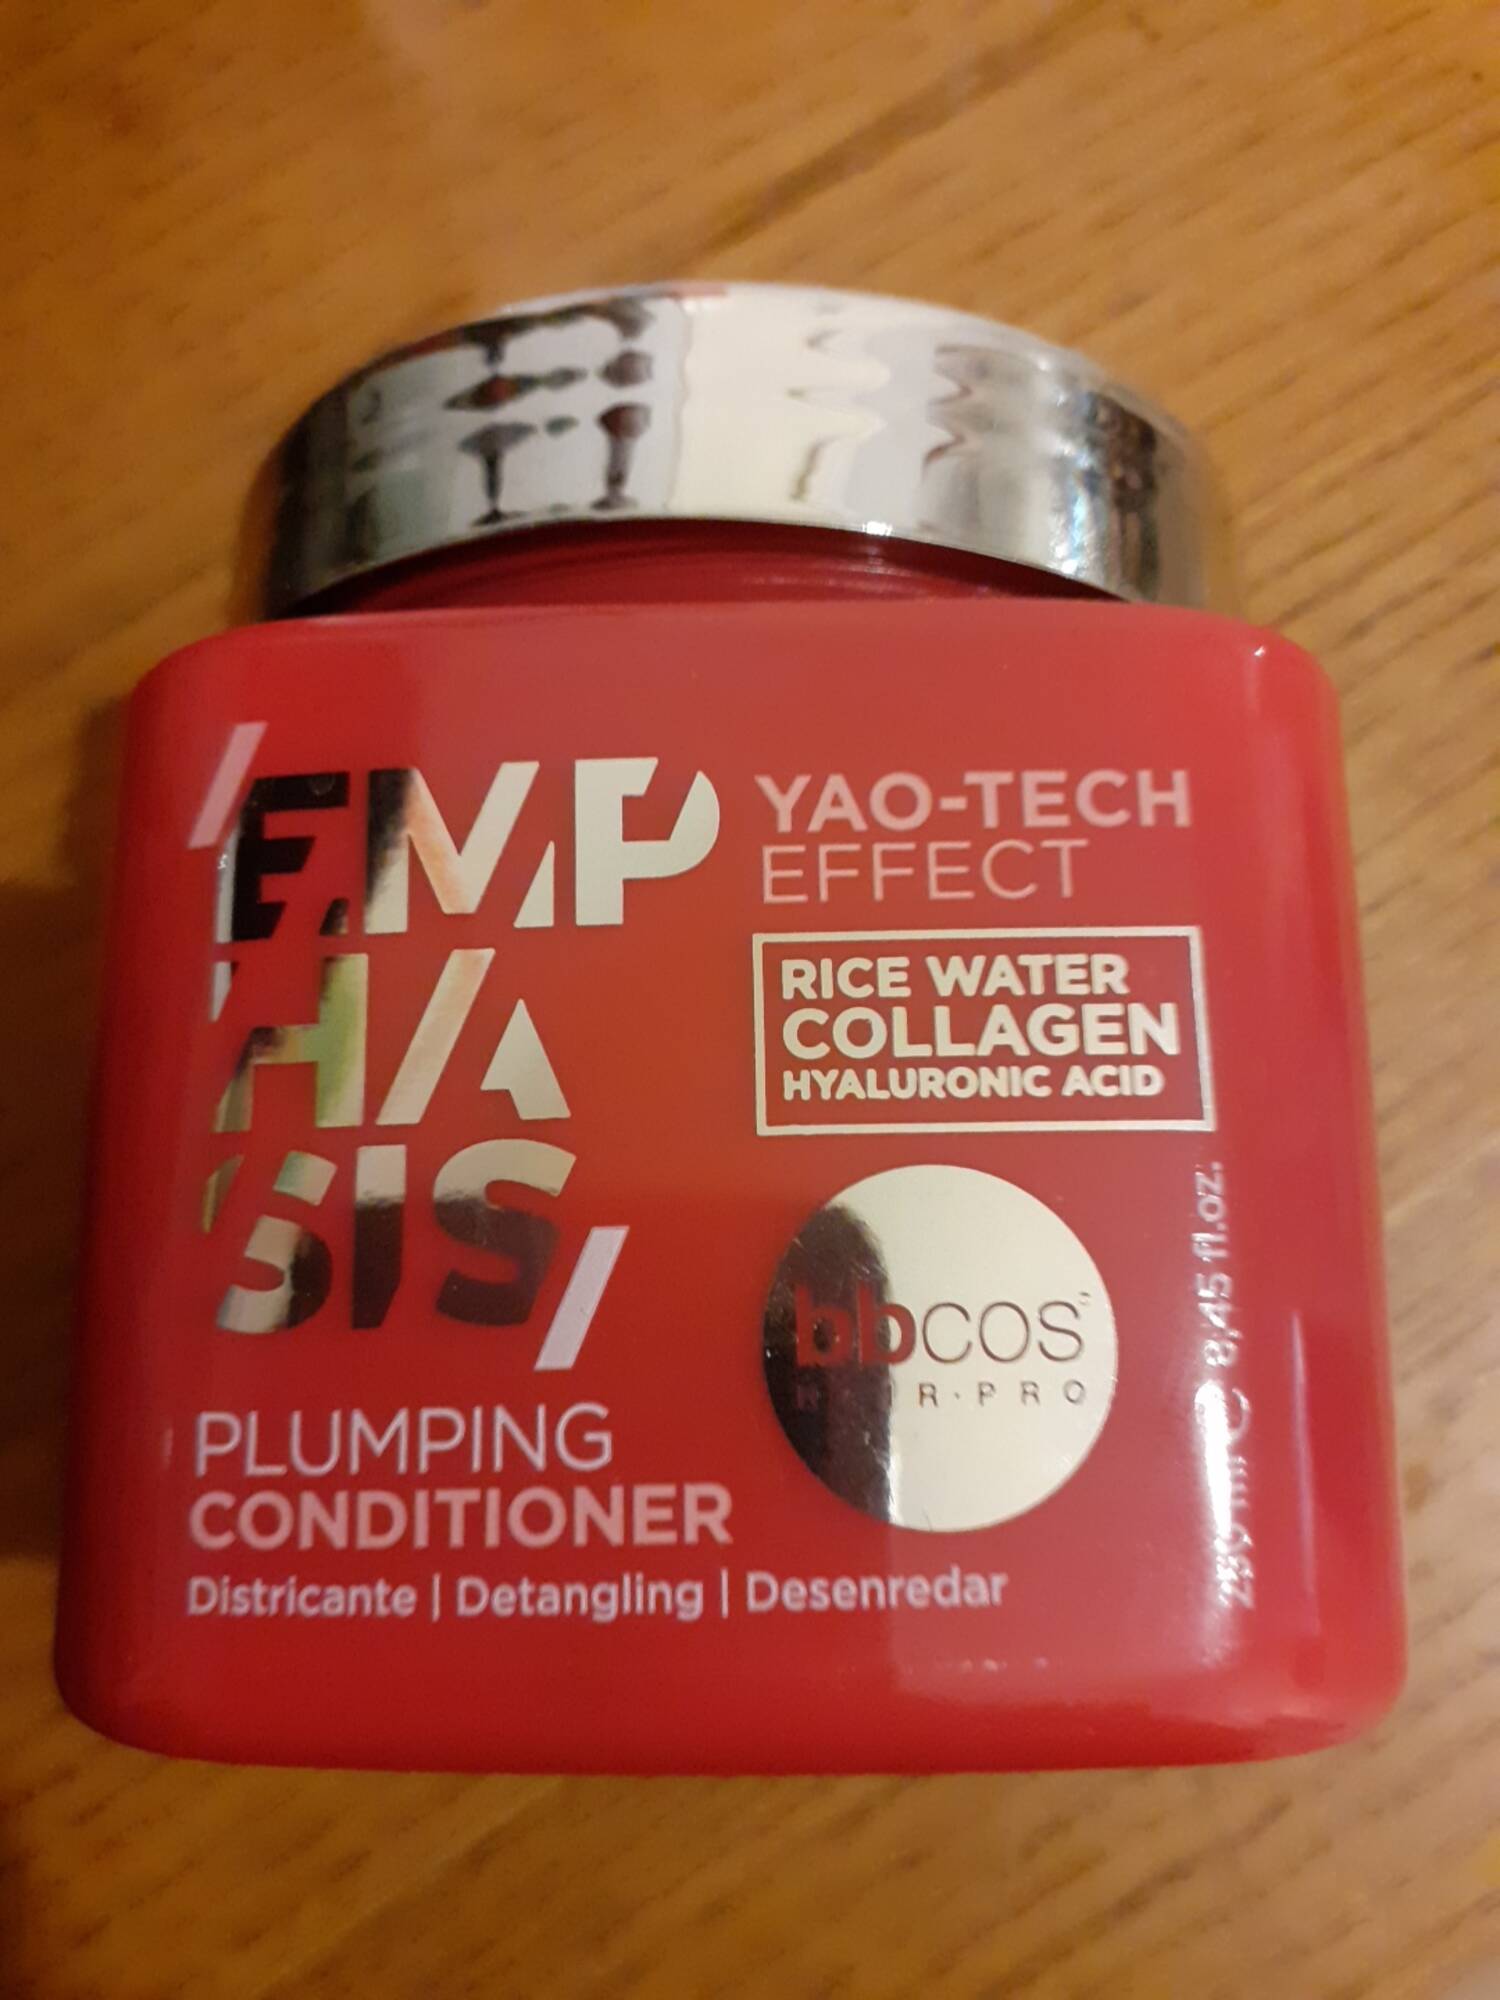 BBCOS - Emphasis Yao-tech effect - Plumping conditioner